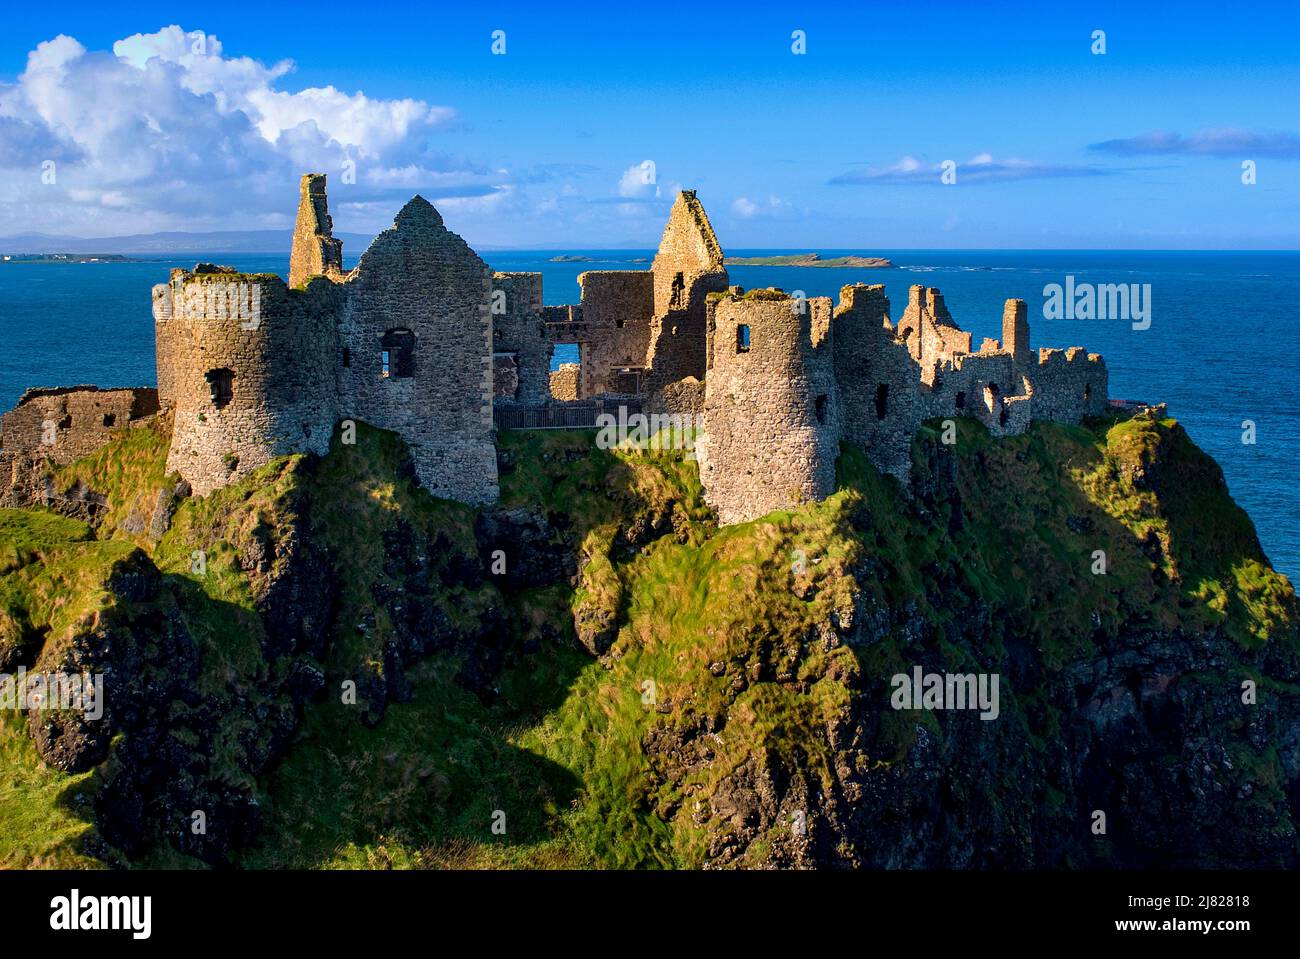 Ruins of Dunluce Castle on the north Antrim coast of Northern Ireland Stock Photo